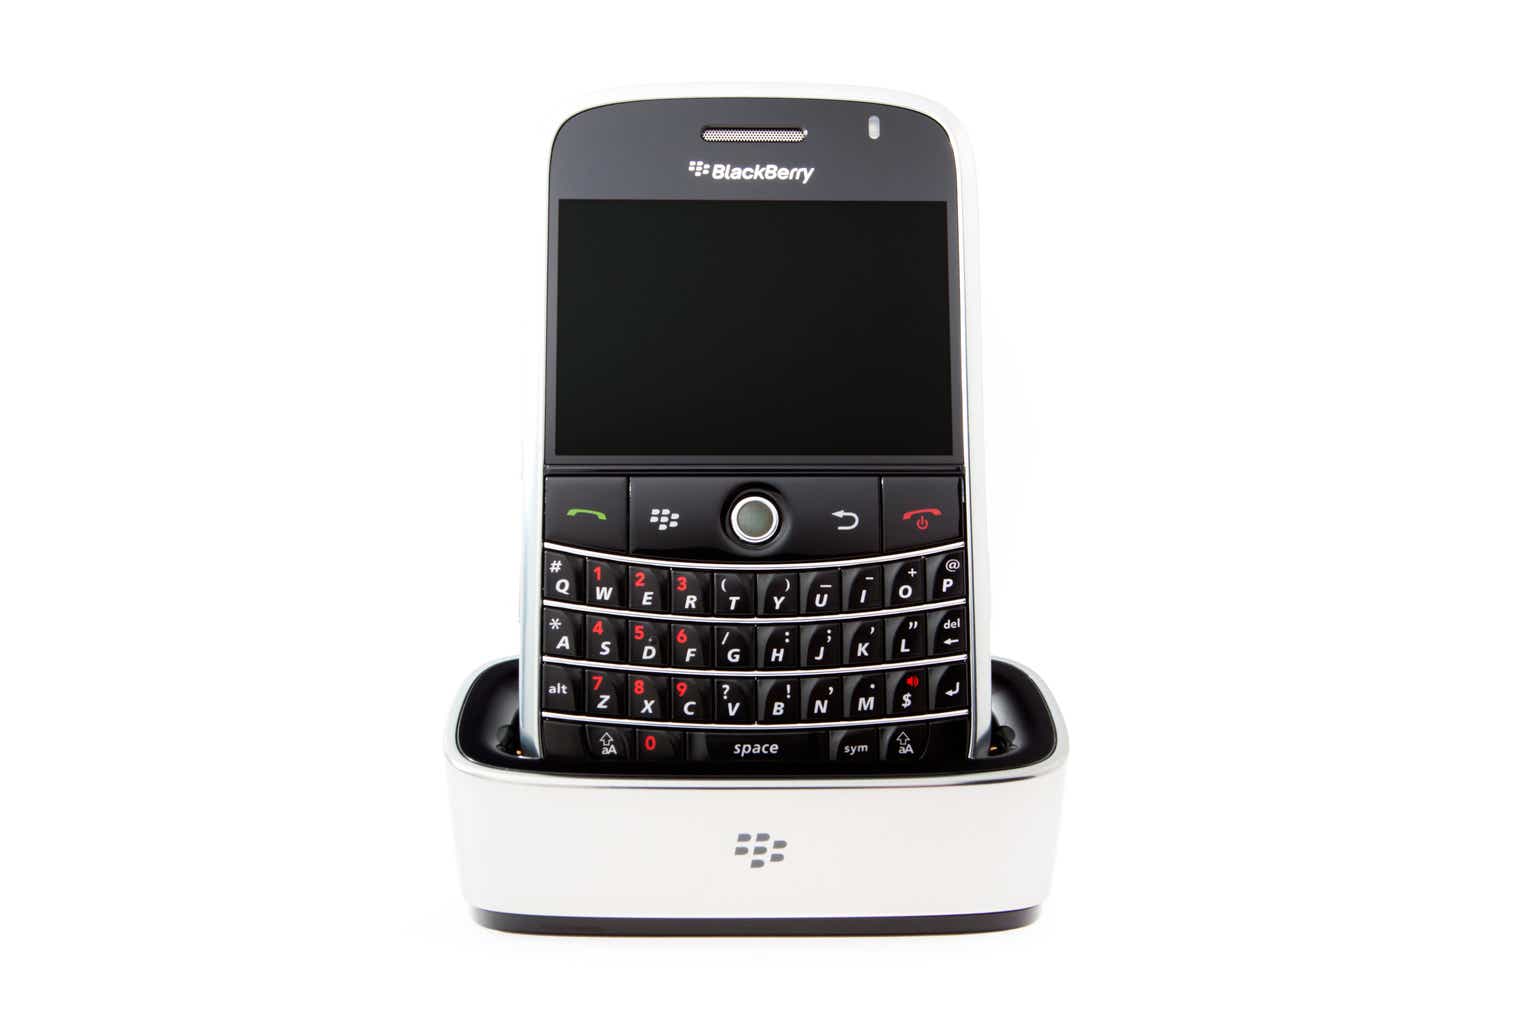 BlackBerry Earnings Preview: Pre-Announcement May Not Save Further Sell-Off